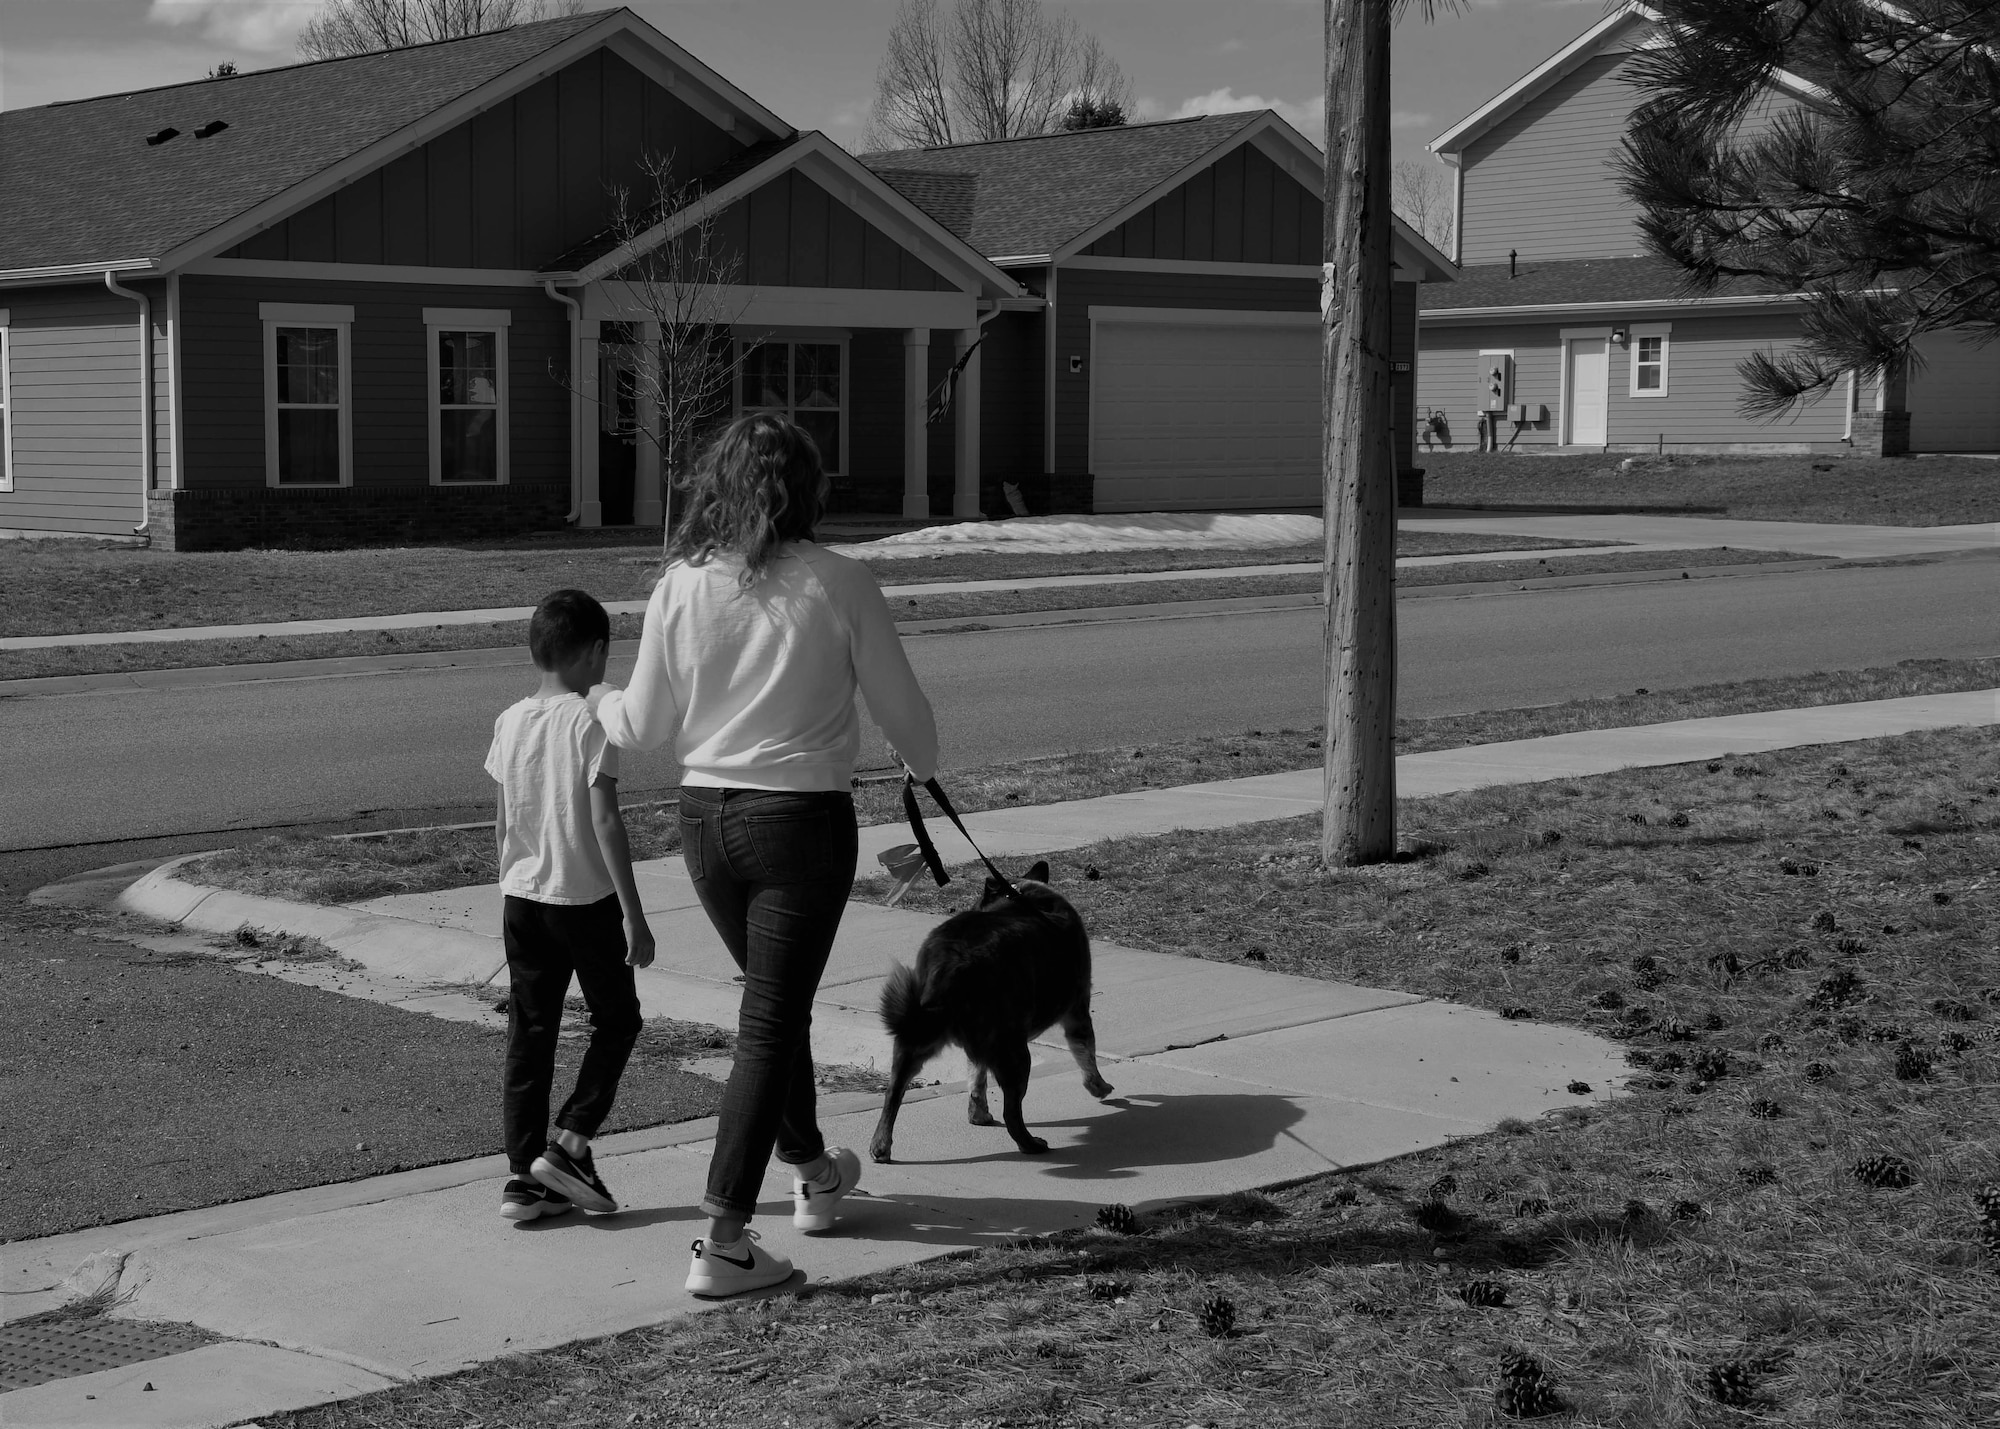 Airman 1st Class Megan Melvin, 90th Communications Squadron knowledge operations, and her son, Reagan walk home with their dog toby, April 6, 2019, on F.E. Warren Air Force Base, Wyo. The life of a military kid isn’t easy but they always make the best of what they have, the Month of The Military Child gives military children the chance look at their own life and talk about what they face as a military child. (U.S. Air Force photo by Airman 1st Class Braydon Williams)